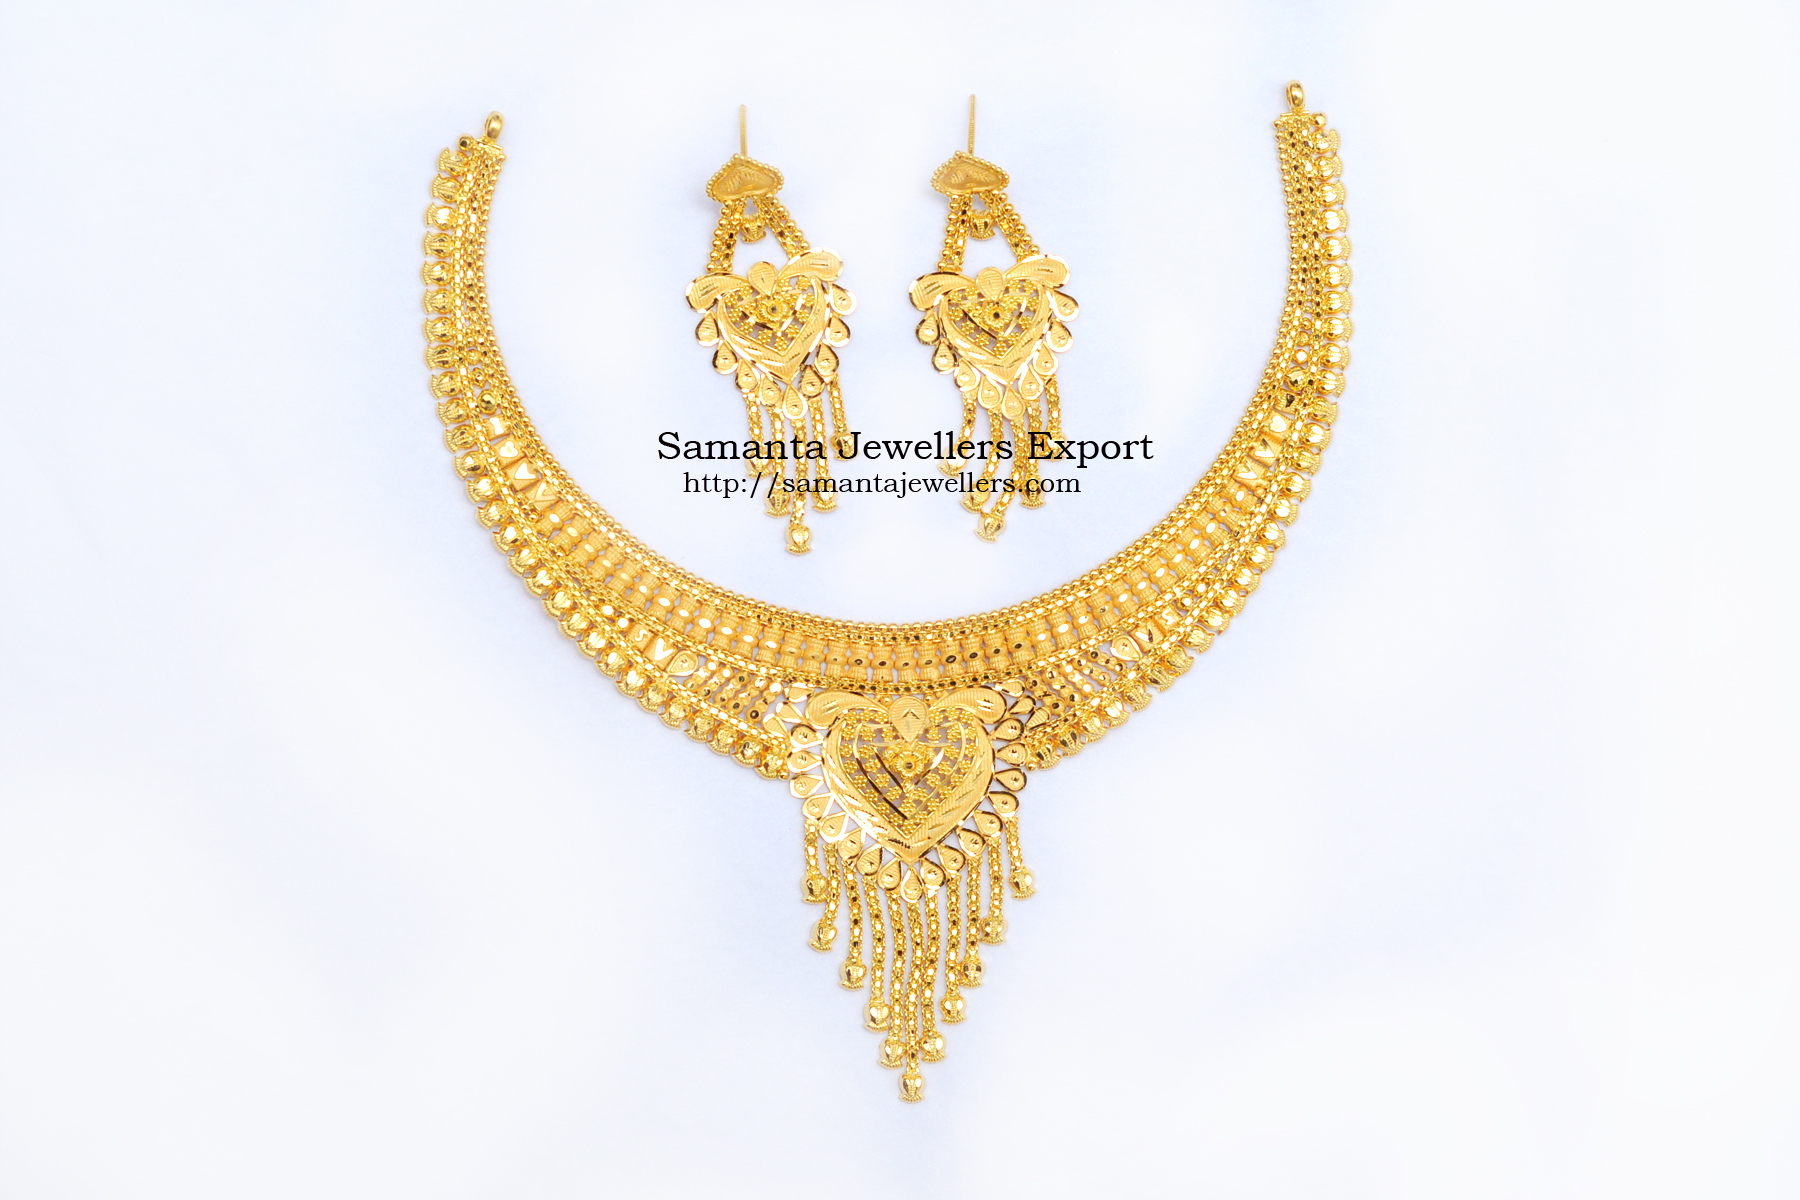 Latest Light Weight Gold Necklace Designs 2021 With Weight And Price | 22kt Wedding Necklace designs 22k Light Gold Trendy Wedding Necklace